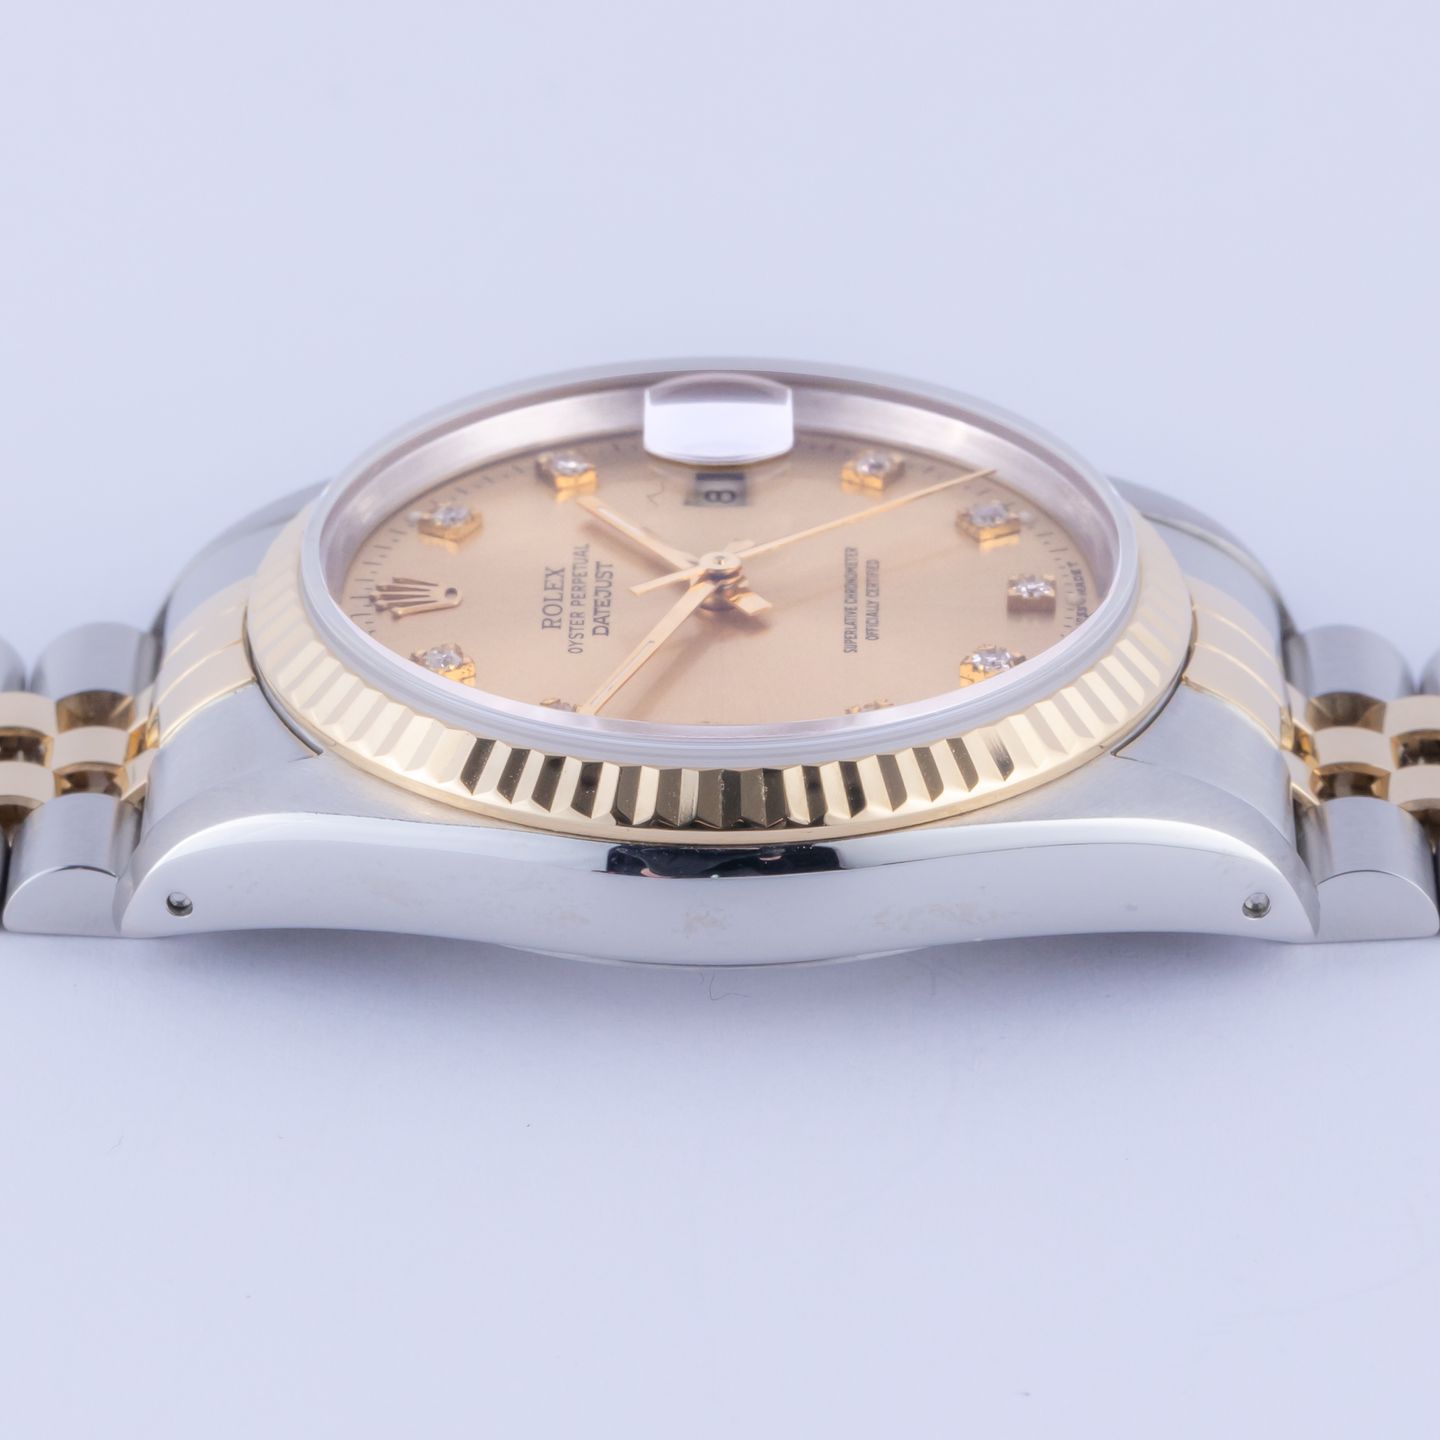 Rolex Datejust 36 16233 (1990) - 36mm Goud/Staal (5/8)